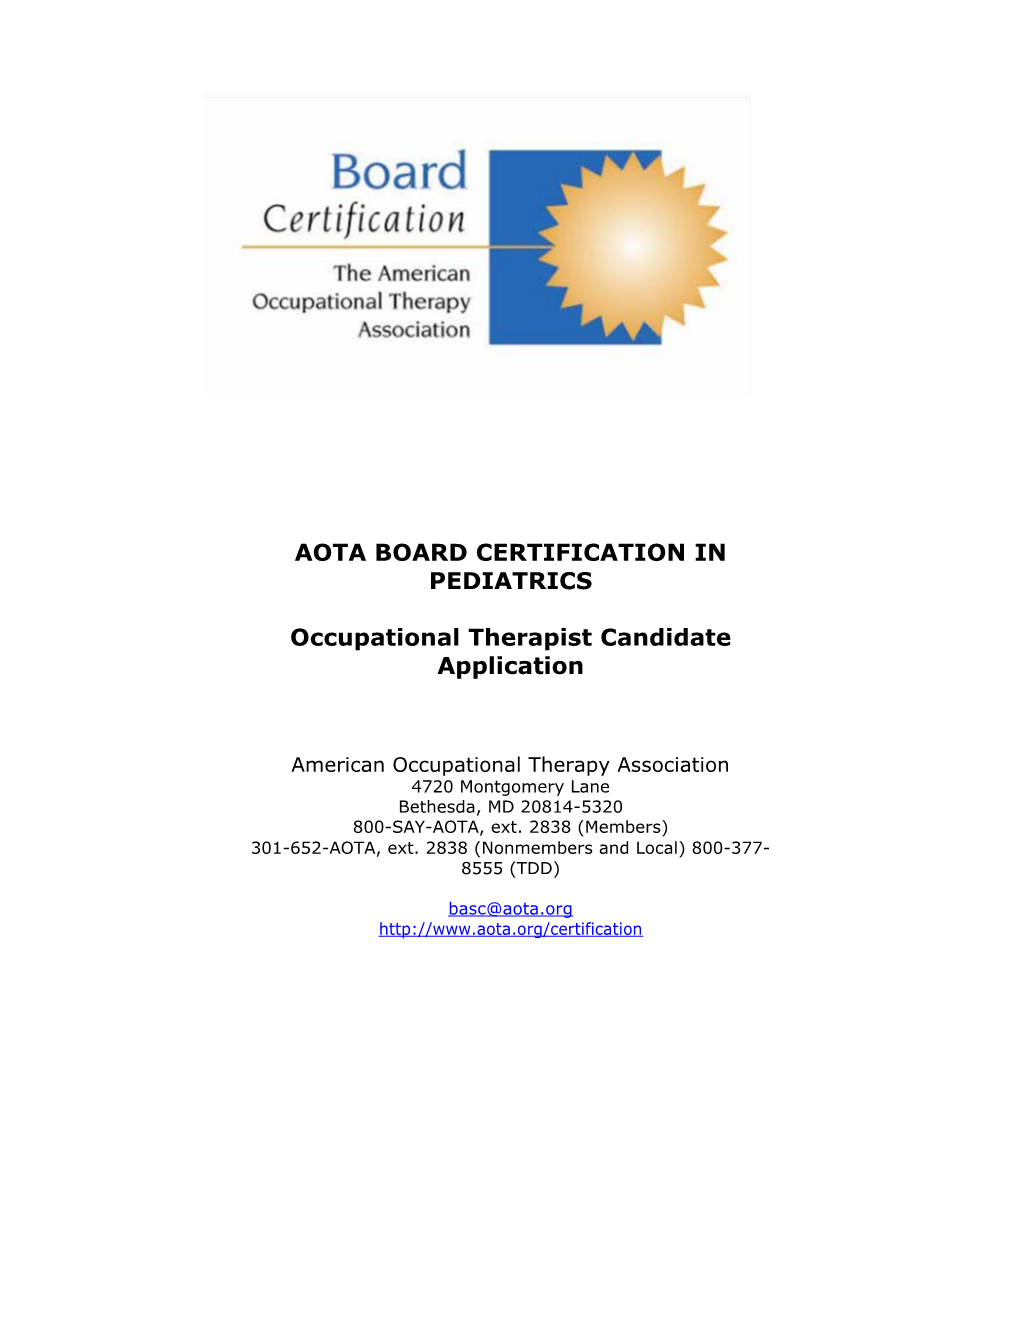 Occupational Therapist Candidate Application